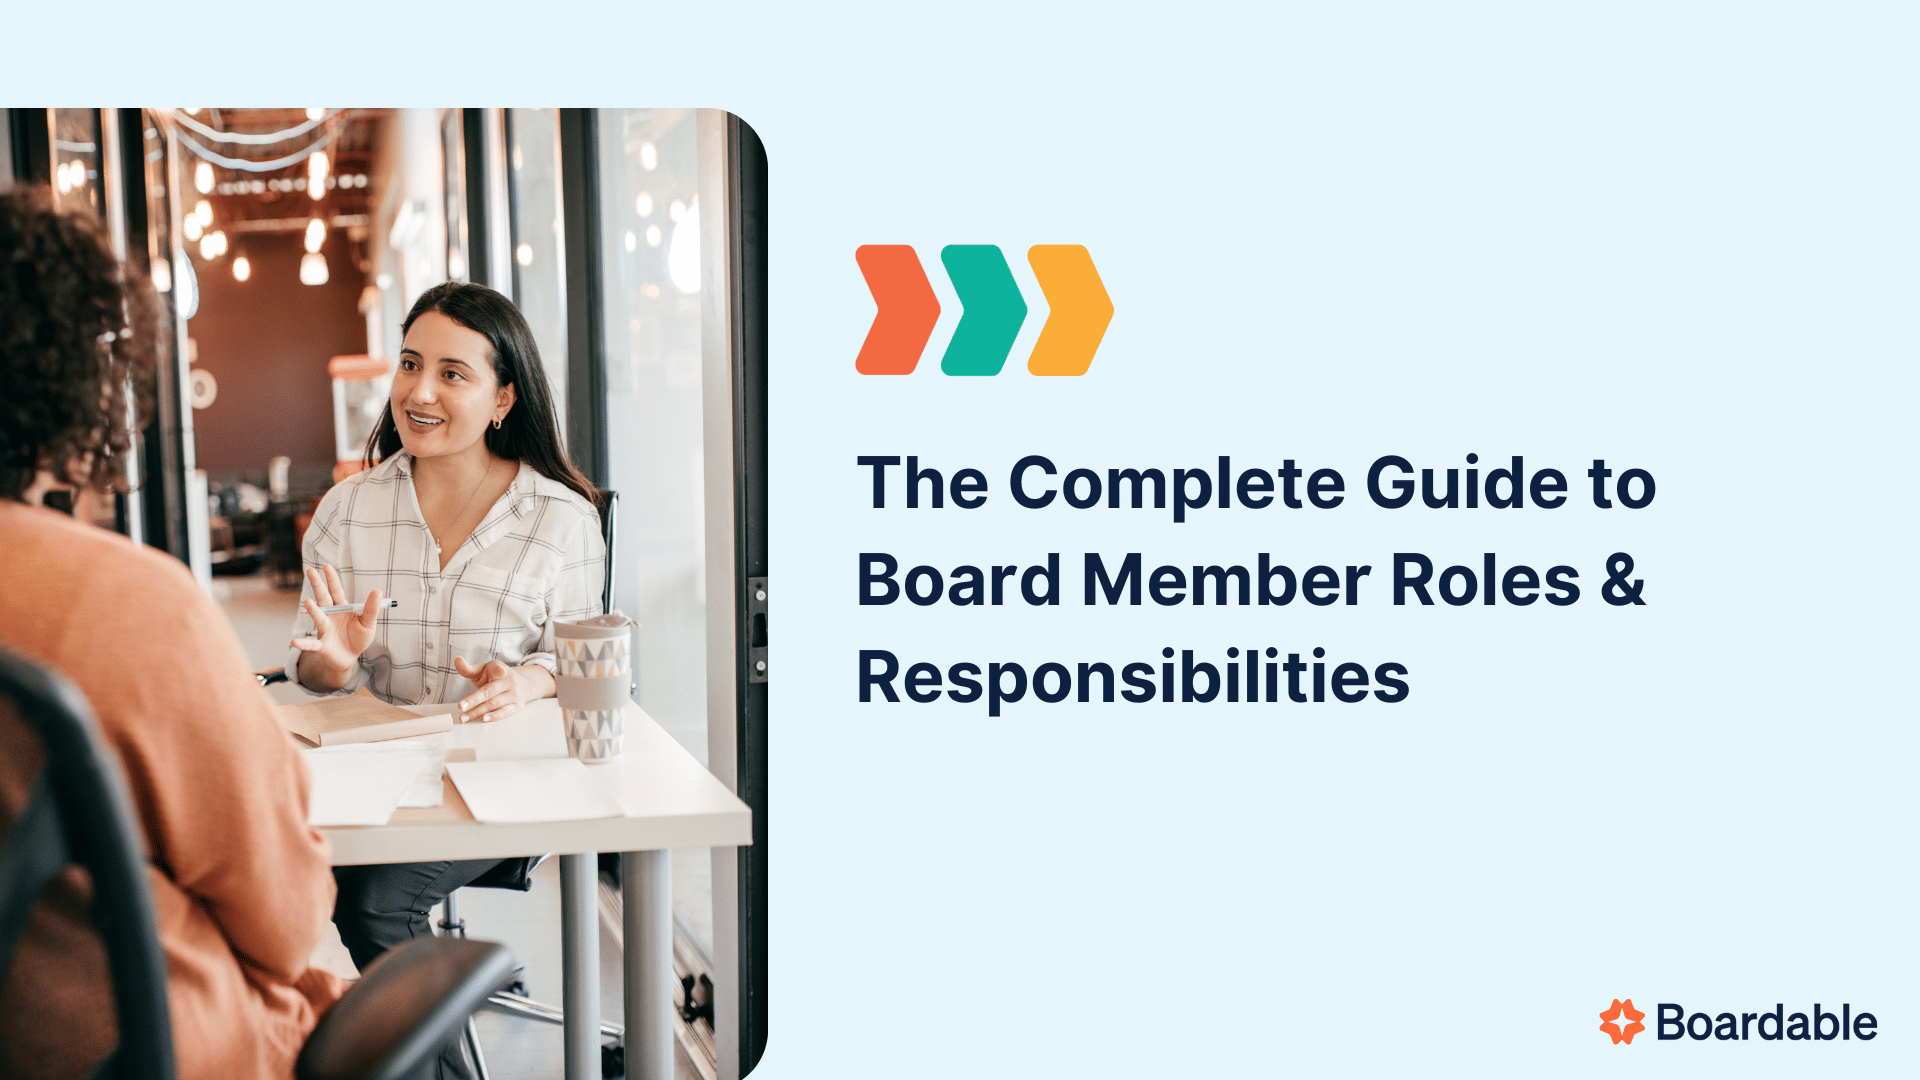 The Complete Guide to Board Member Roles & Responsibilities